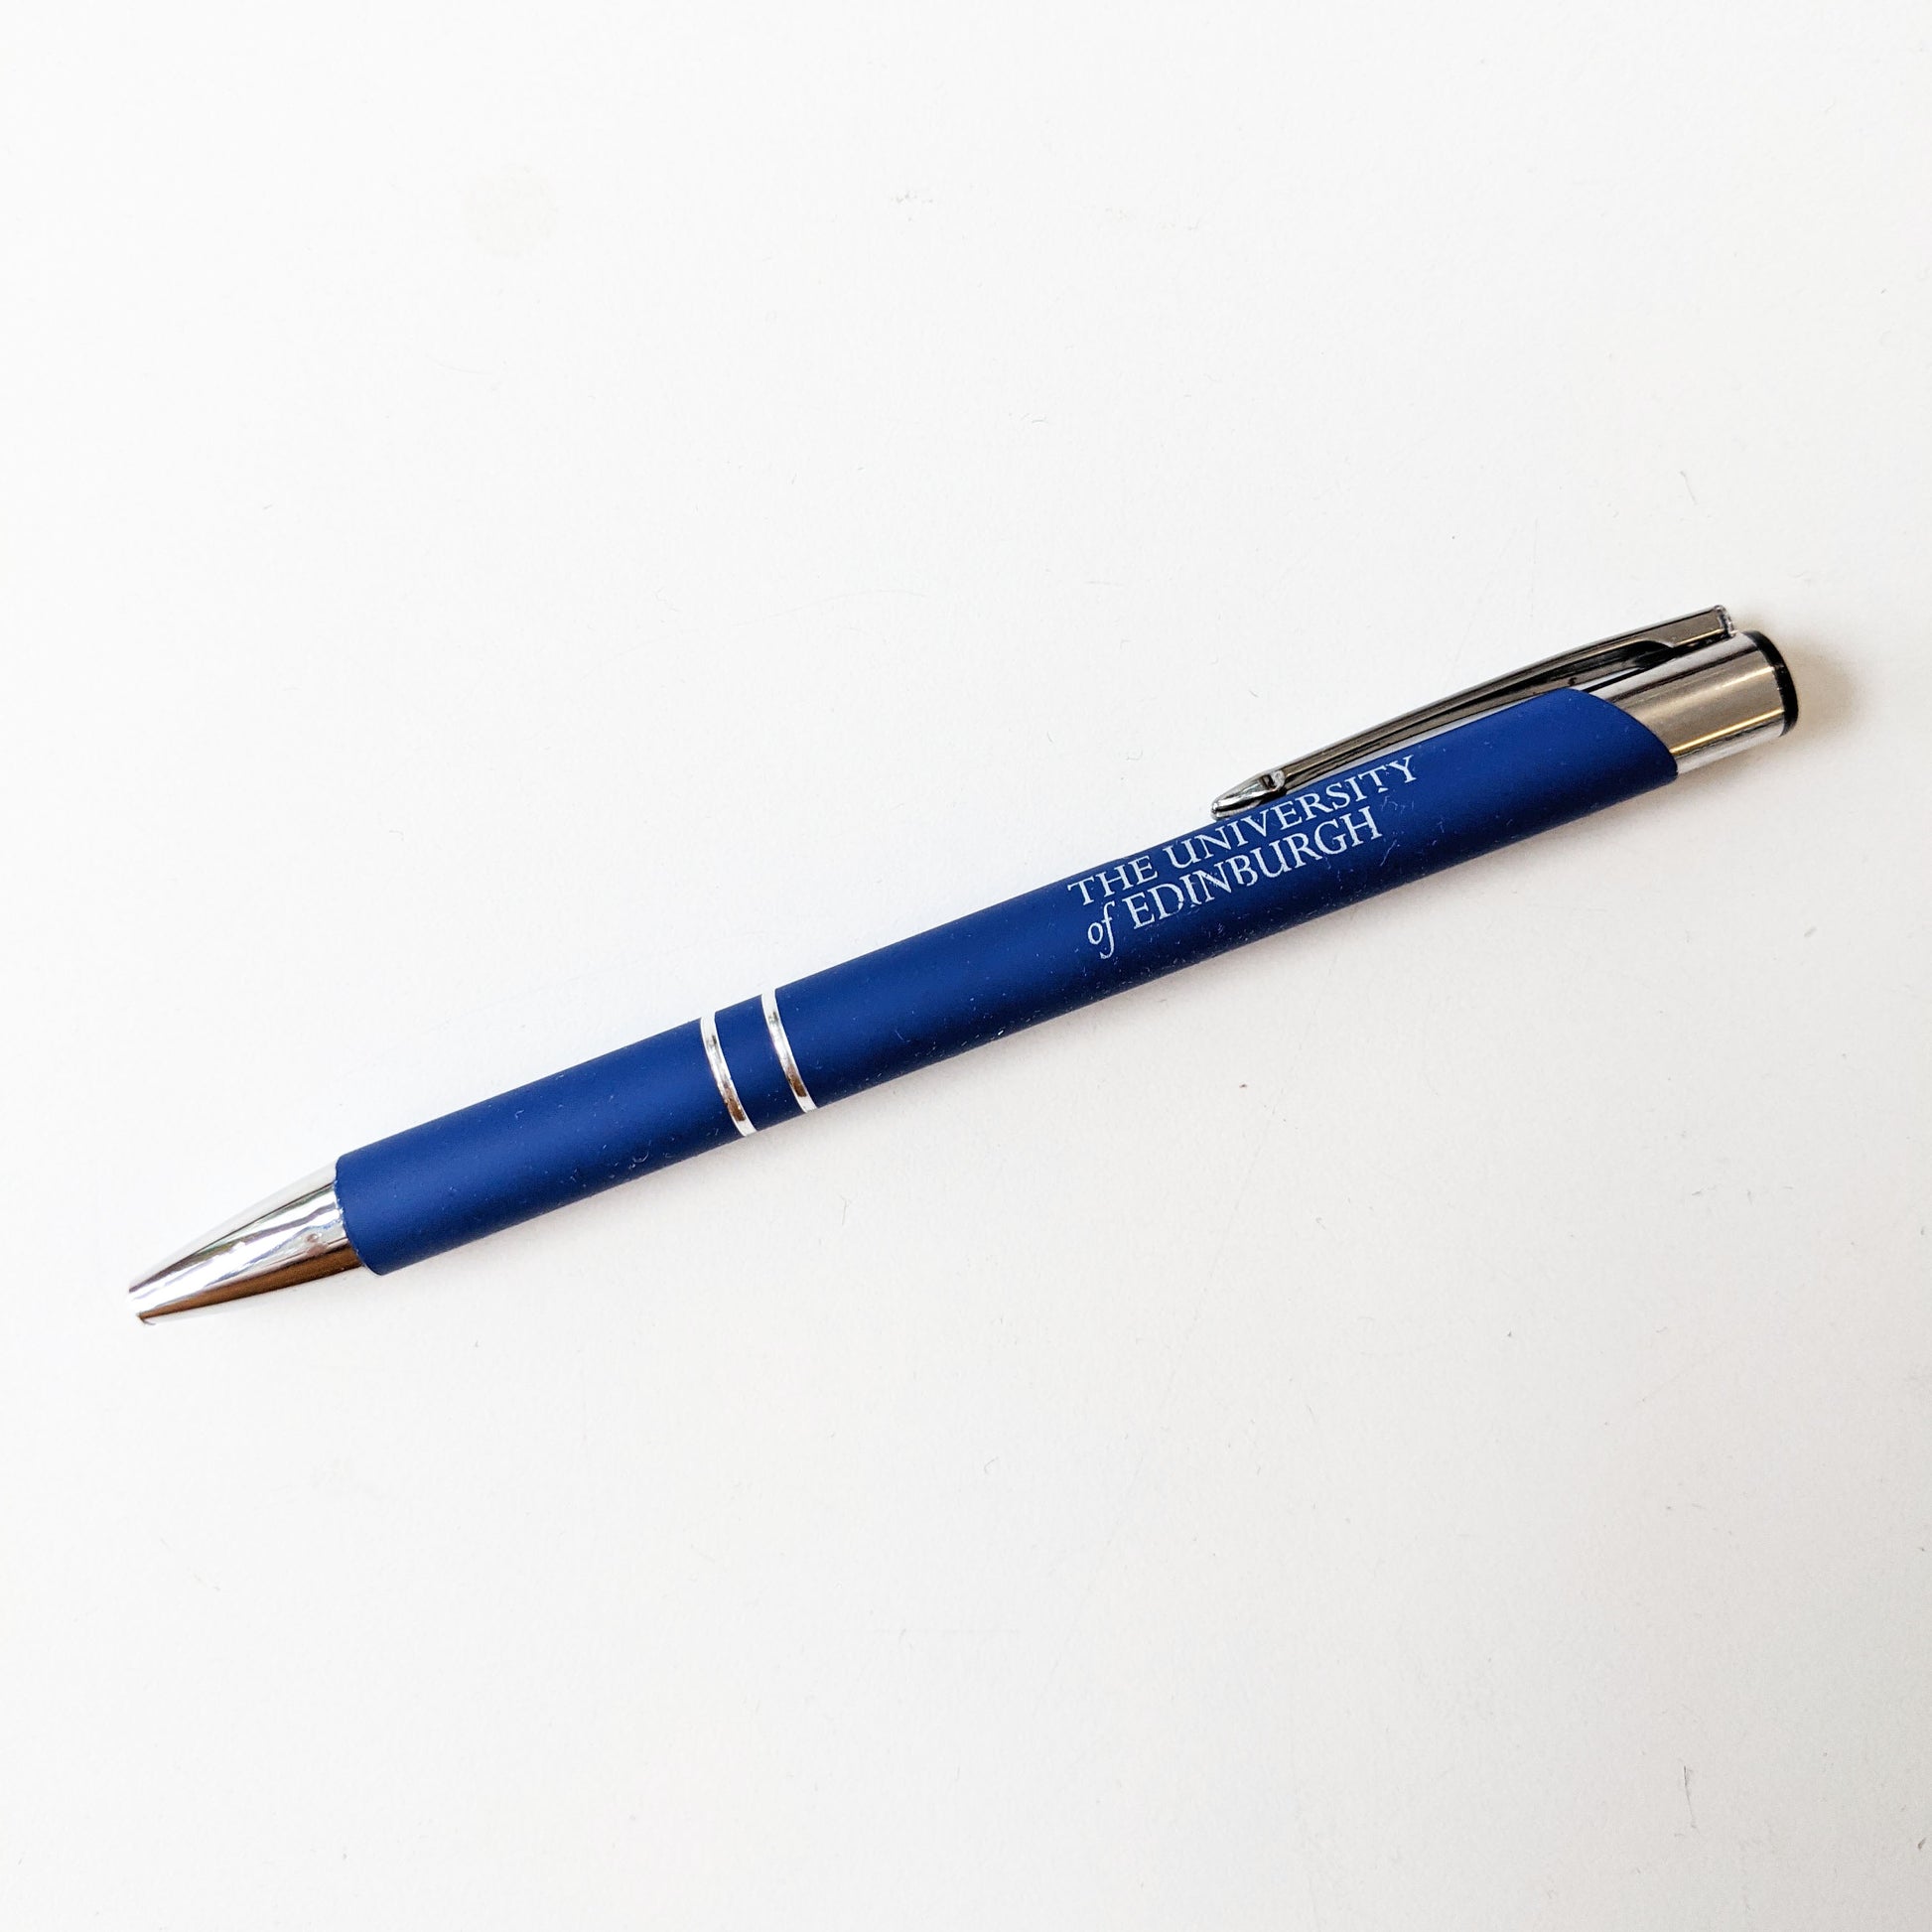 Blue soft feel pen with 'The University of Edinburgh' printed on the barrel in white.